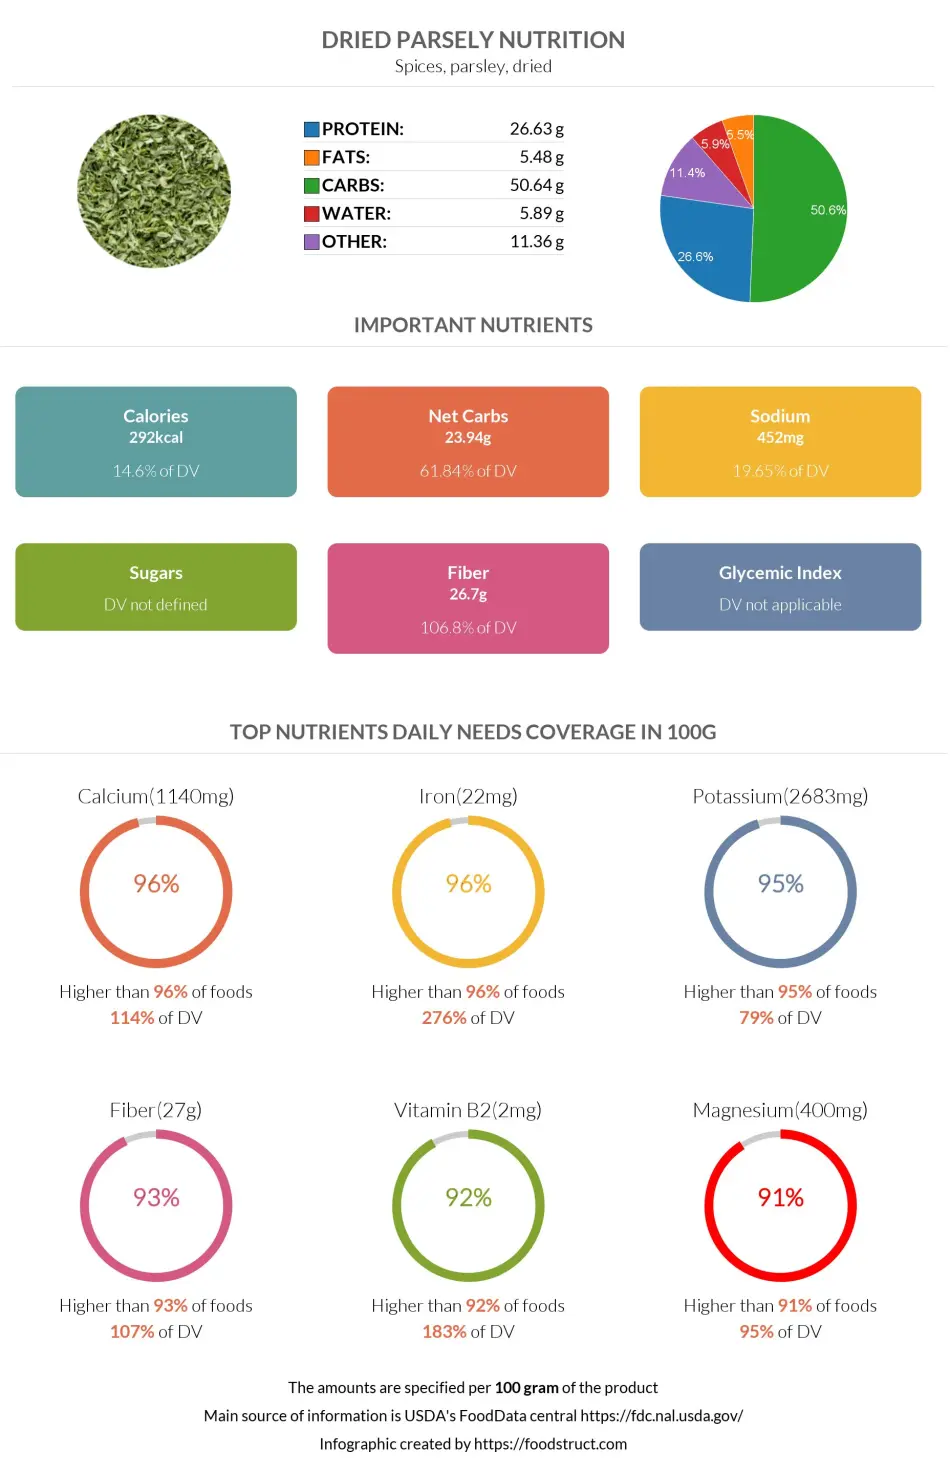 Dried parsely nutrition infographic